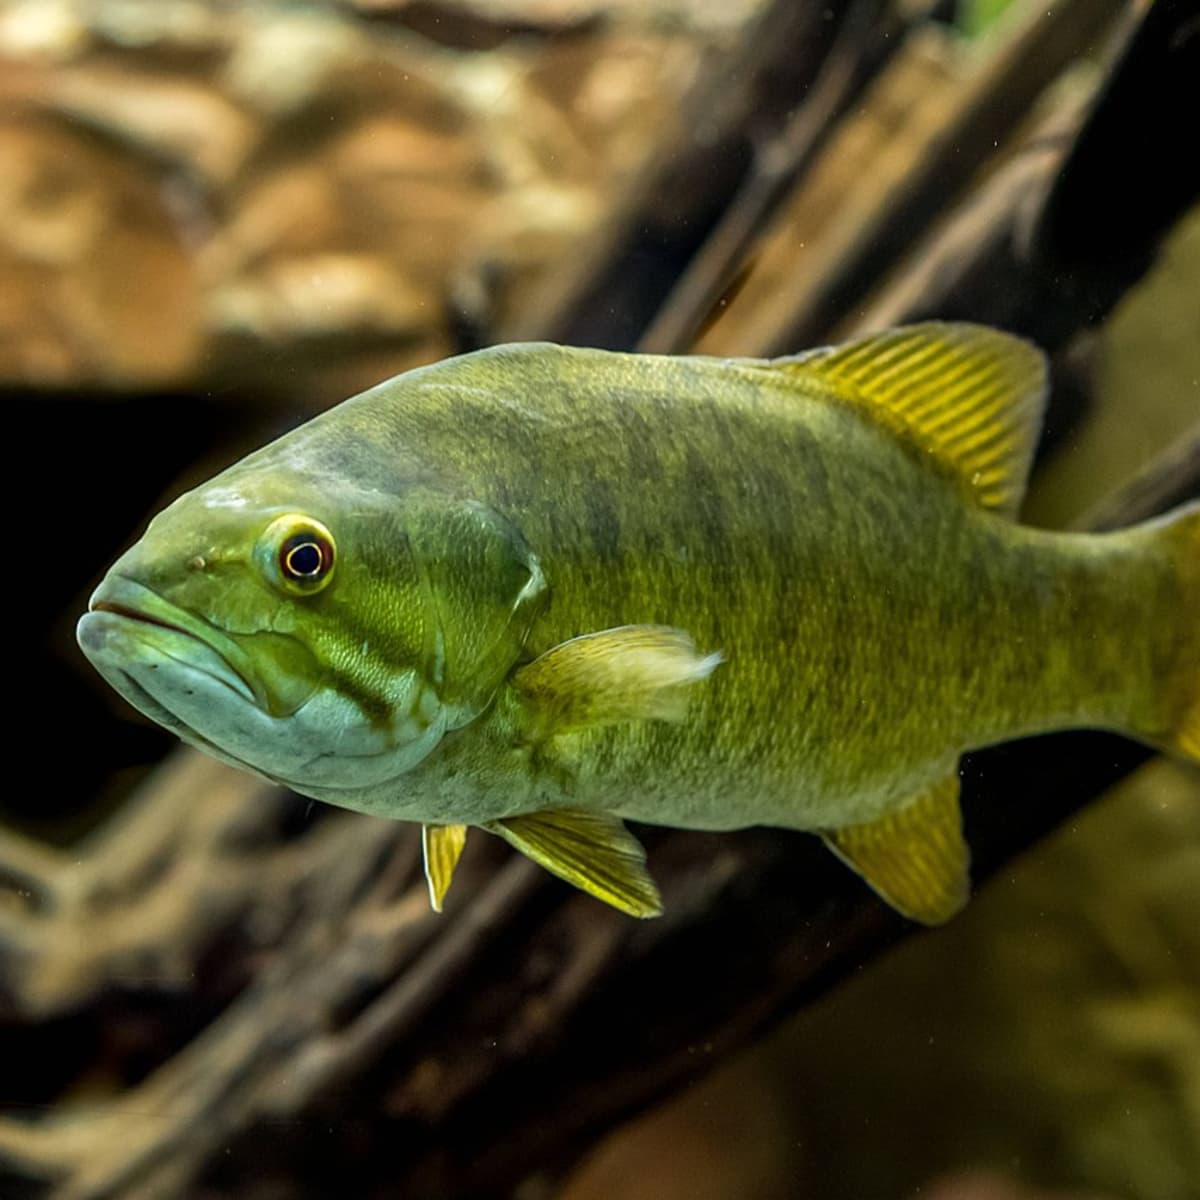 Can You Keep Wild Fish as Pets Legally in Your Home Aquarium